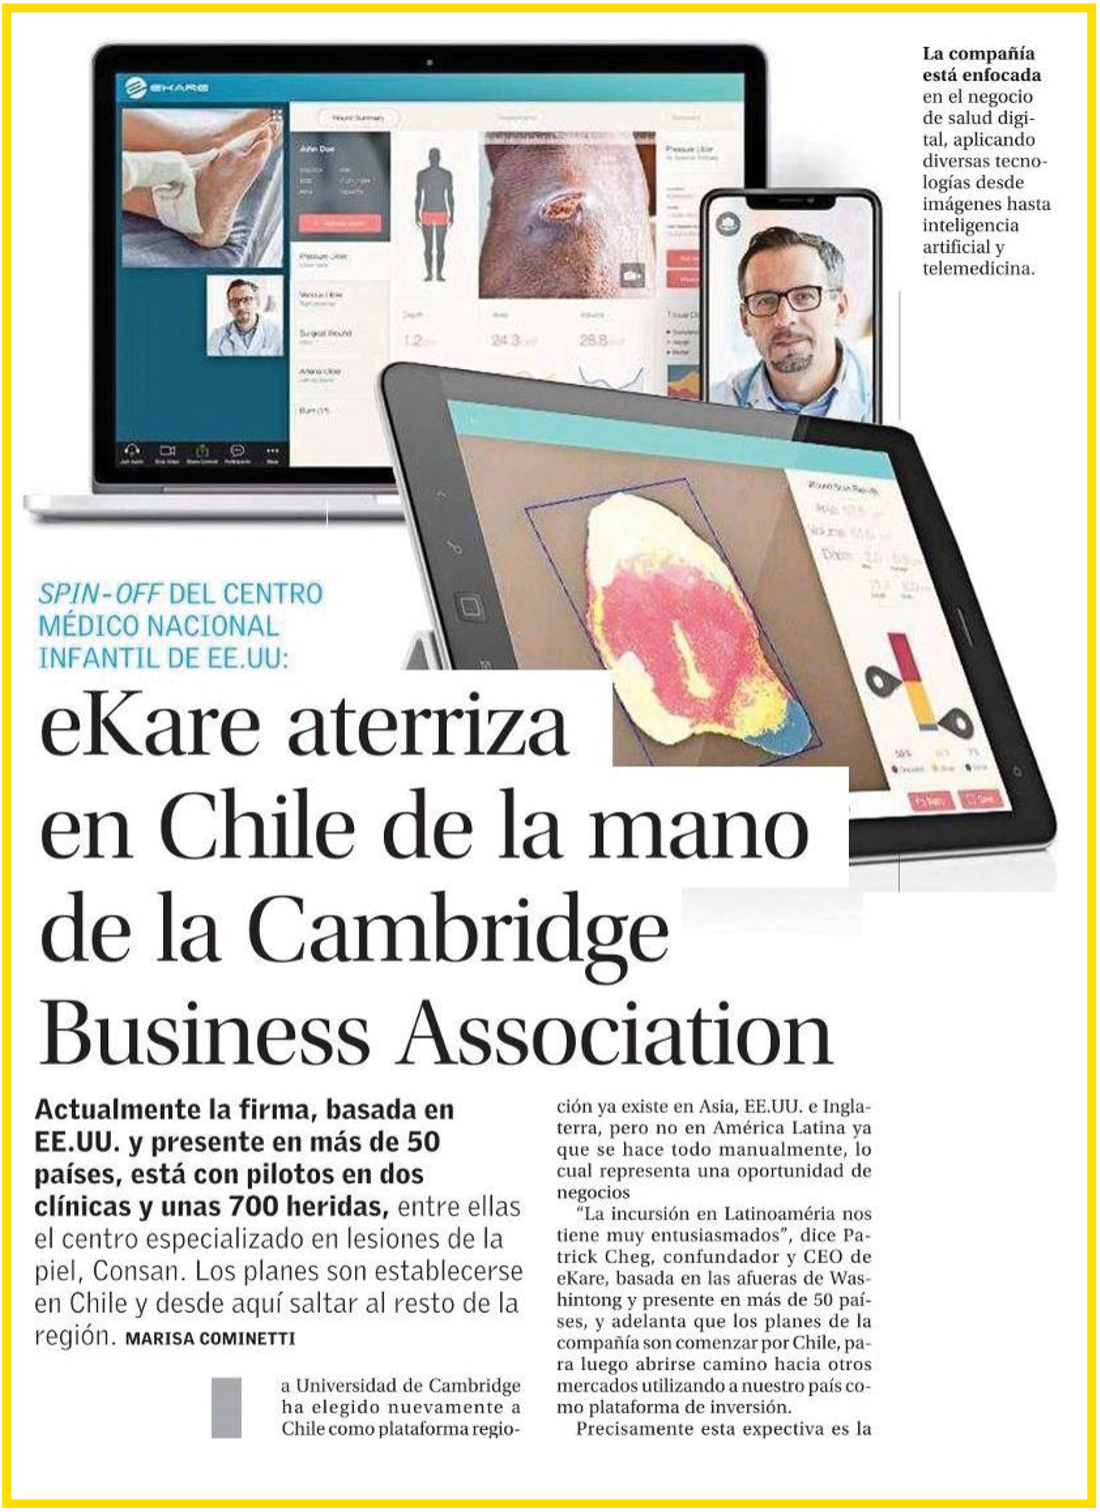 eKare's international marketing and public relations efforts include securing coverage in publications like Chilean newspaper 'El Mercurio'